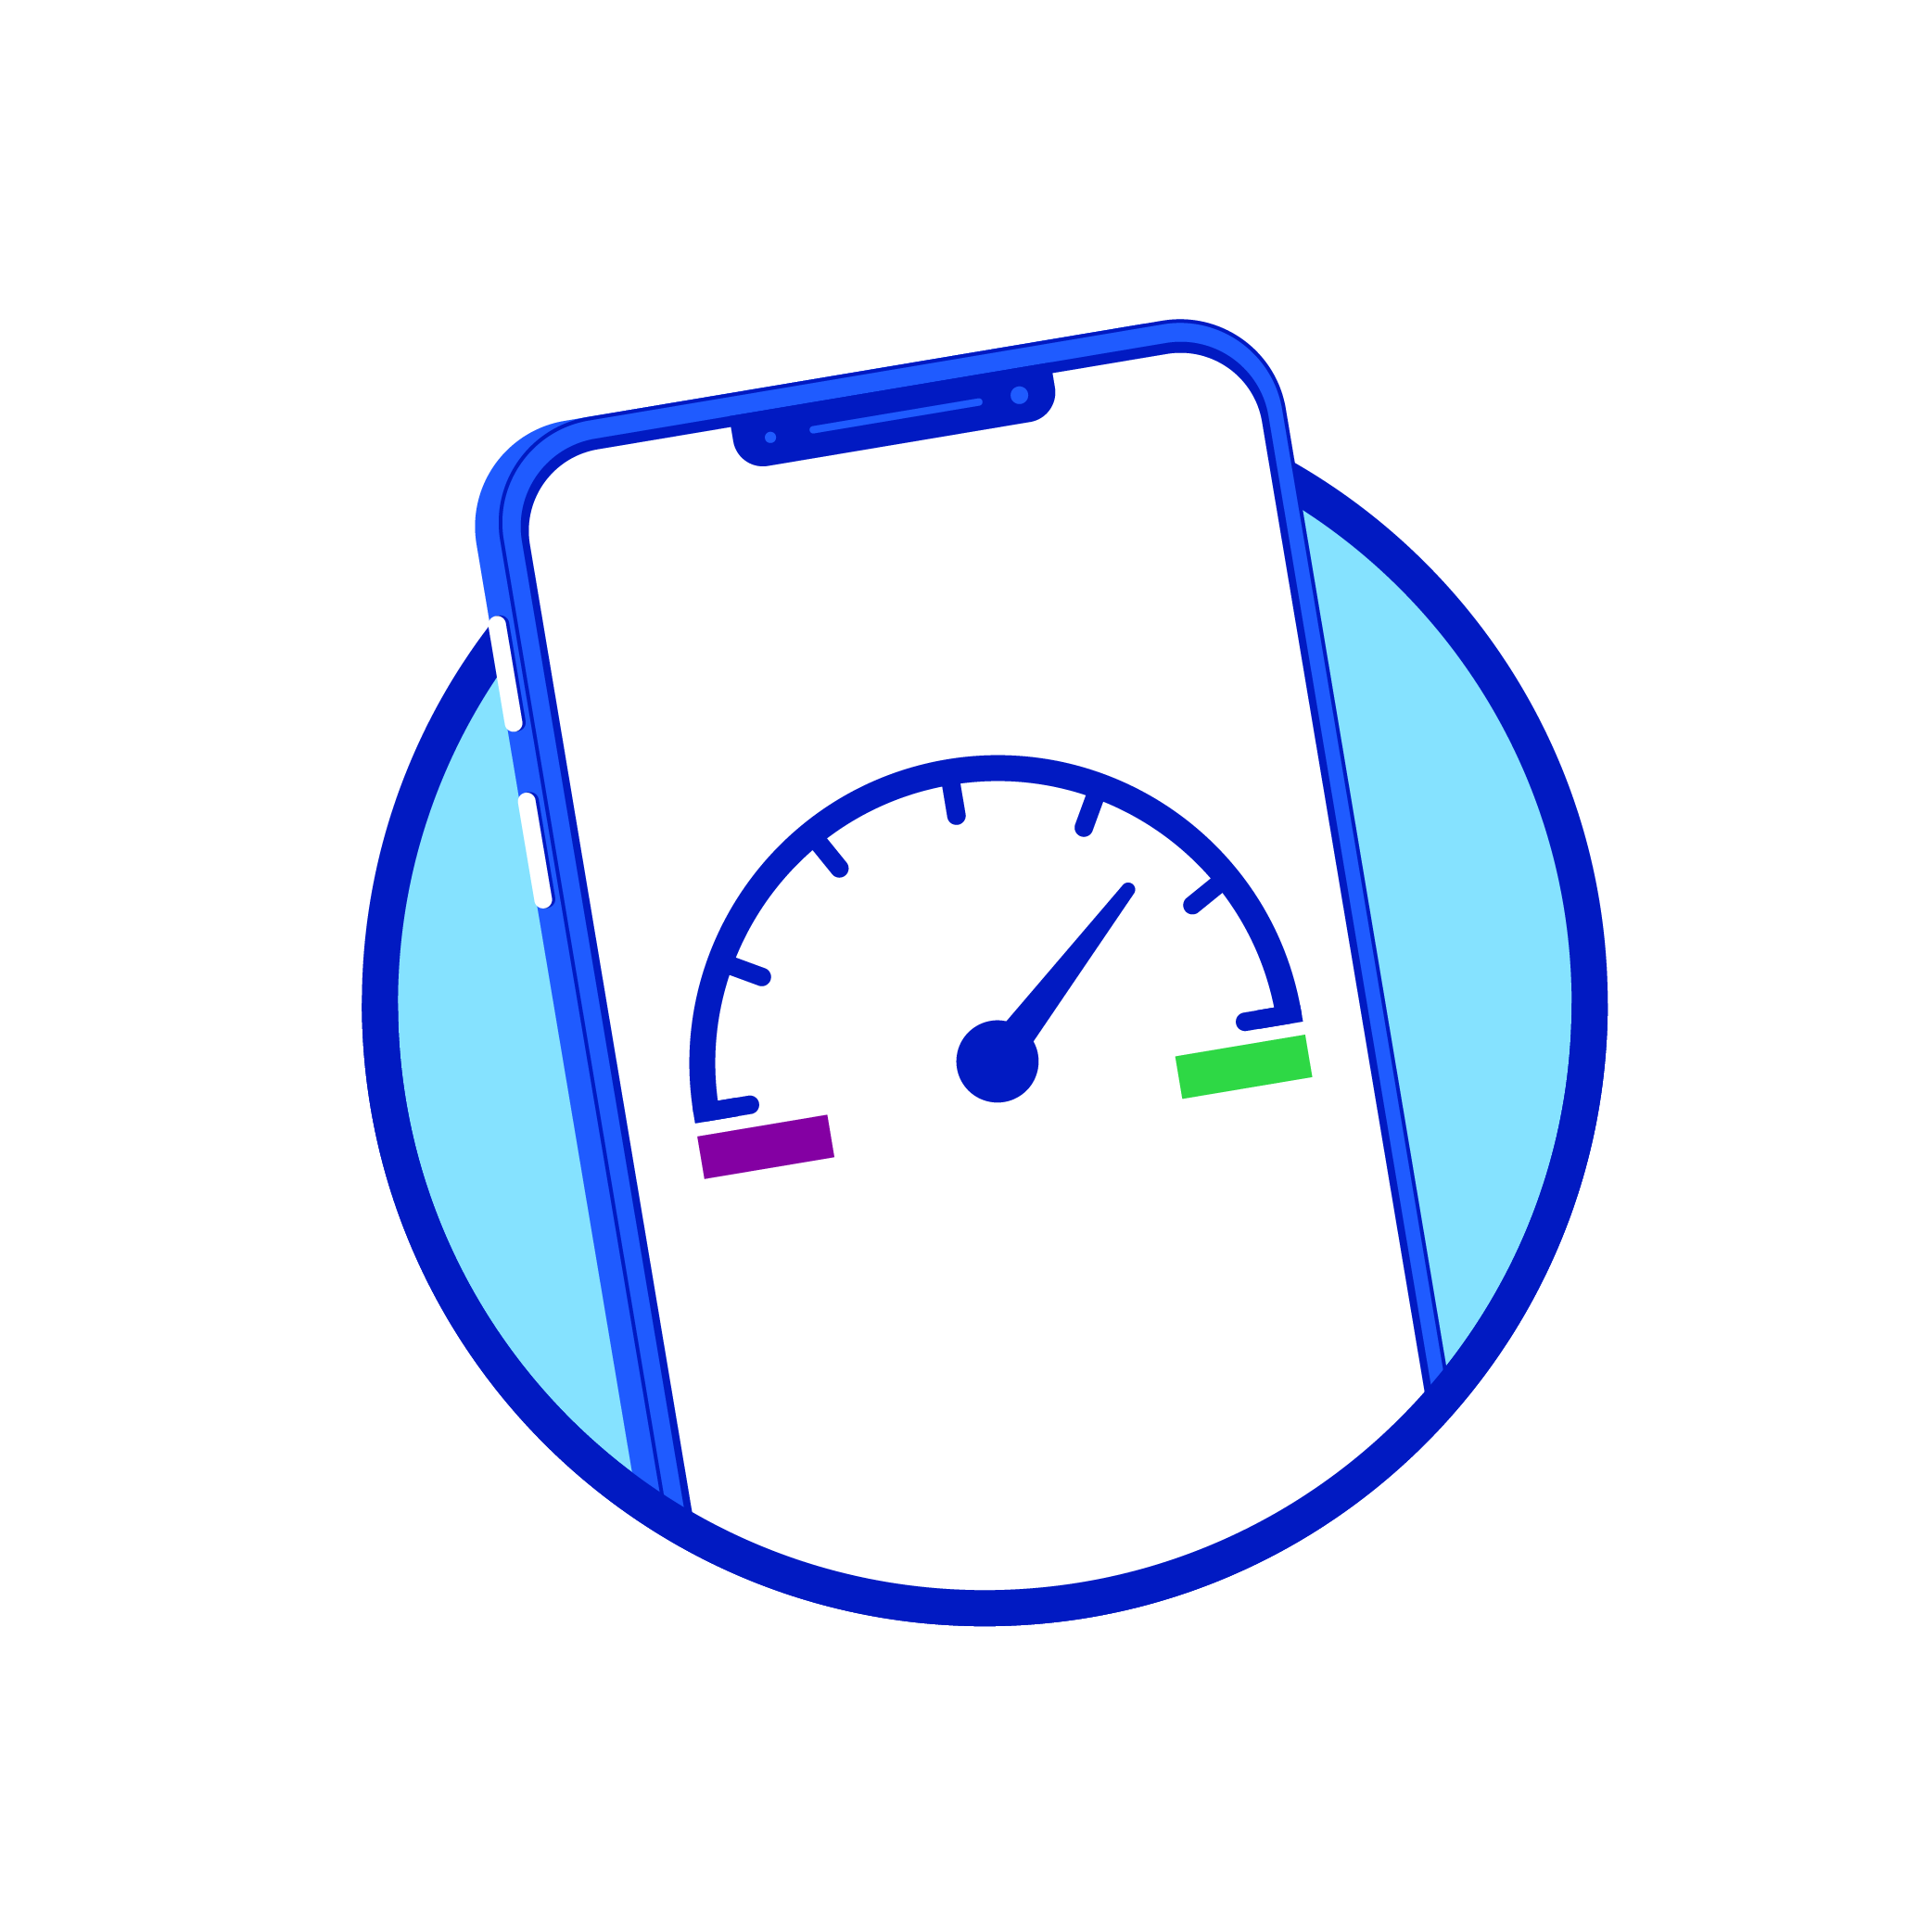 Phone illustration with speedometer in the middle